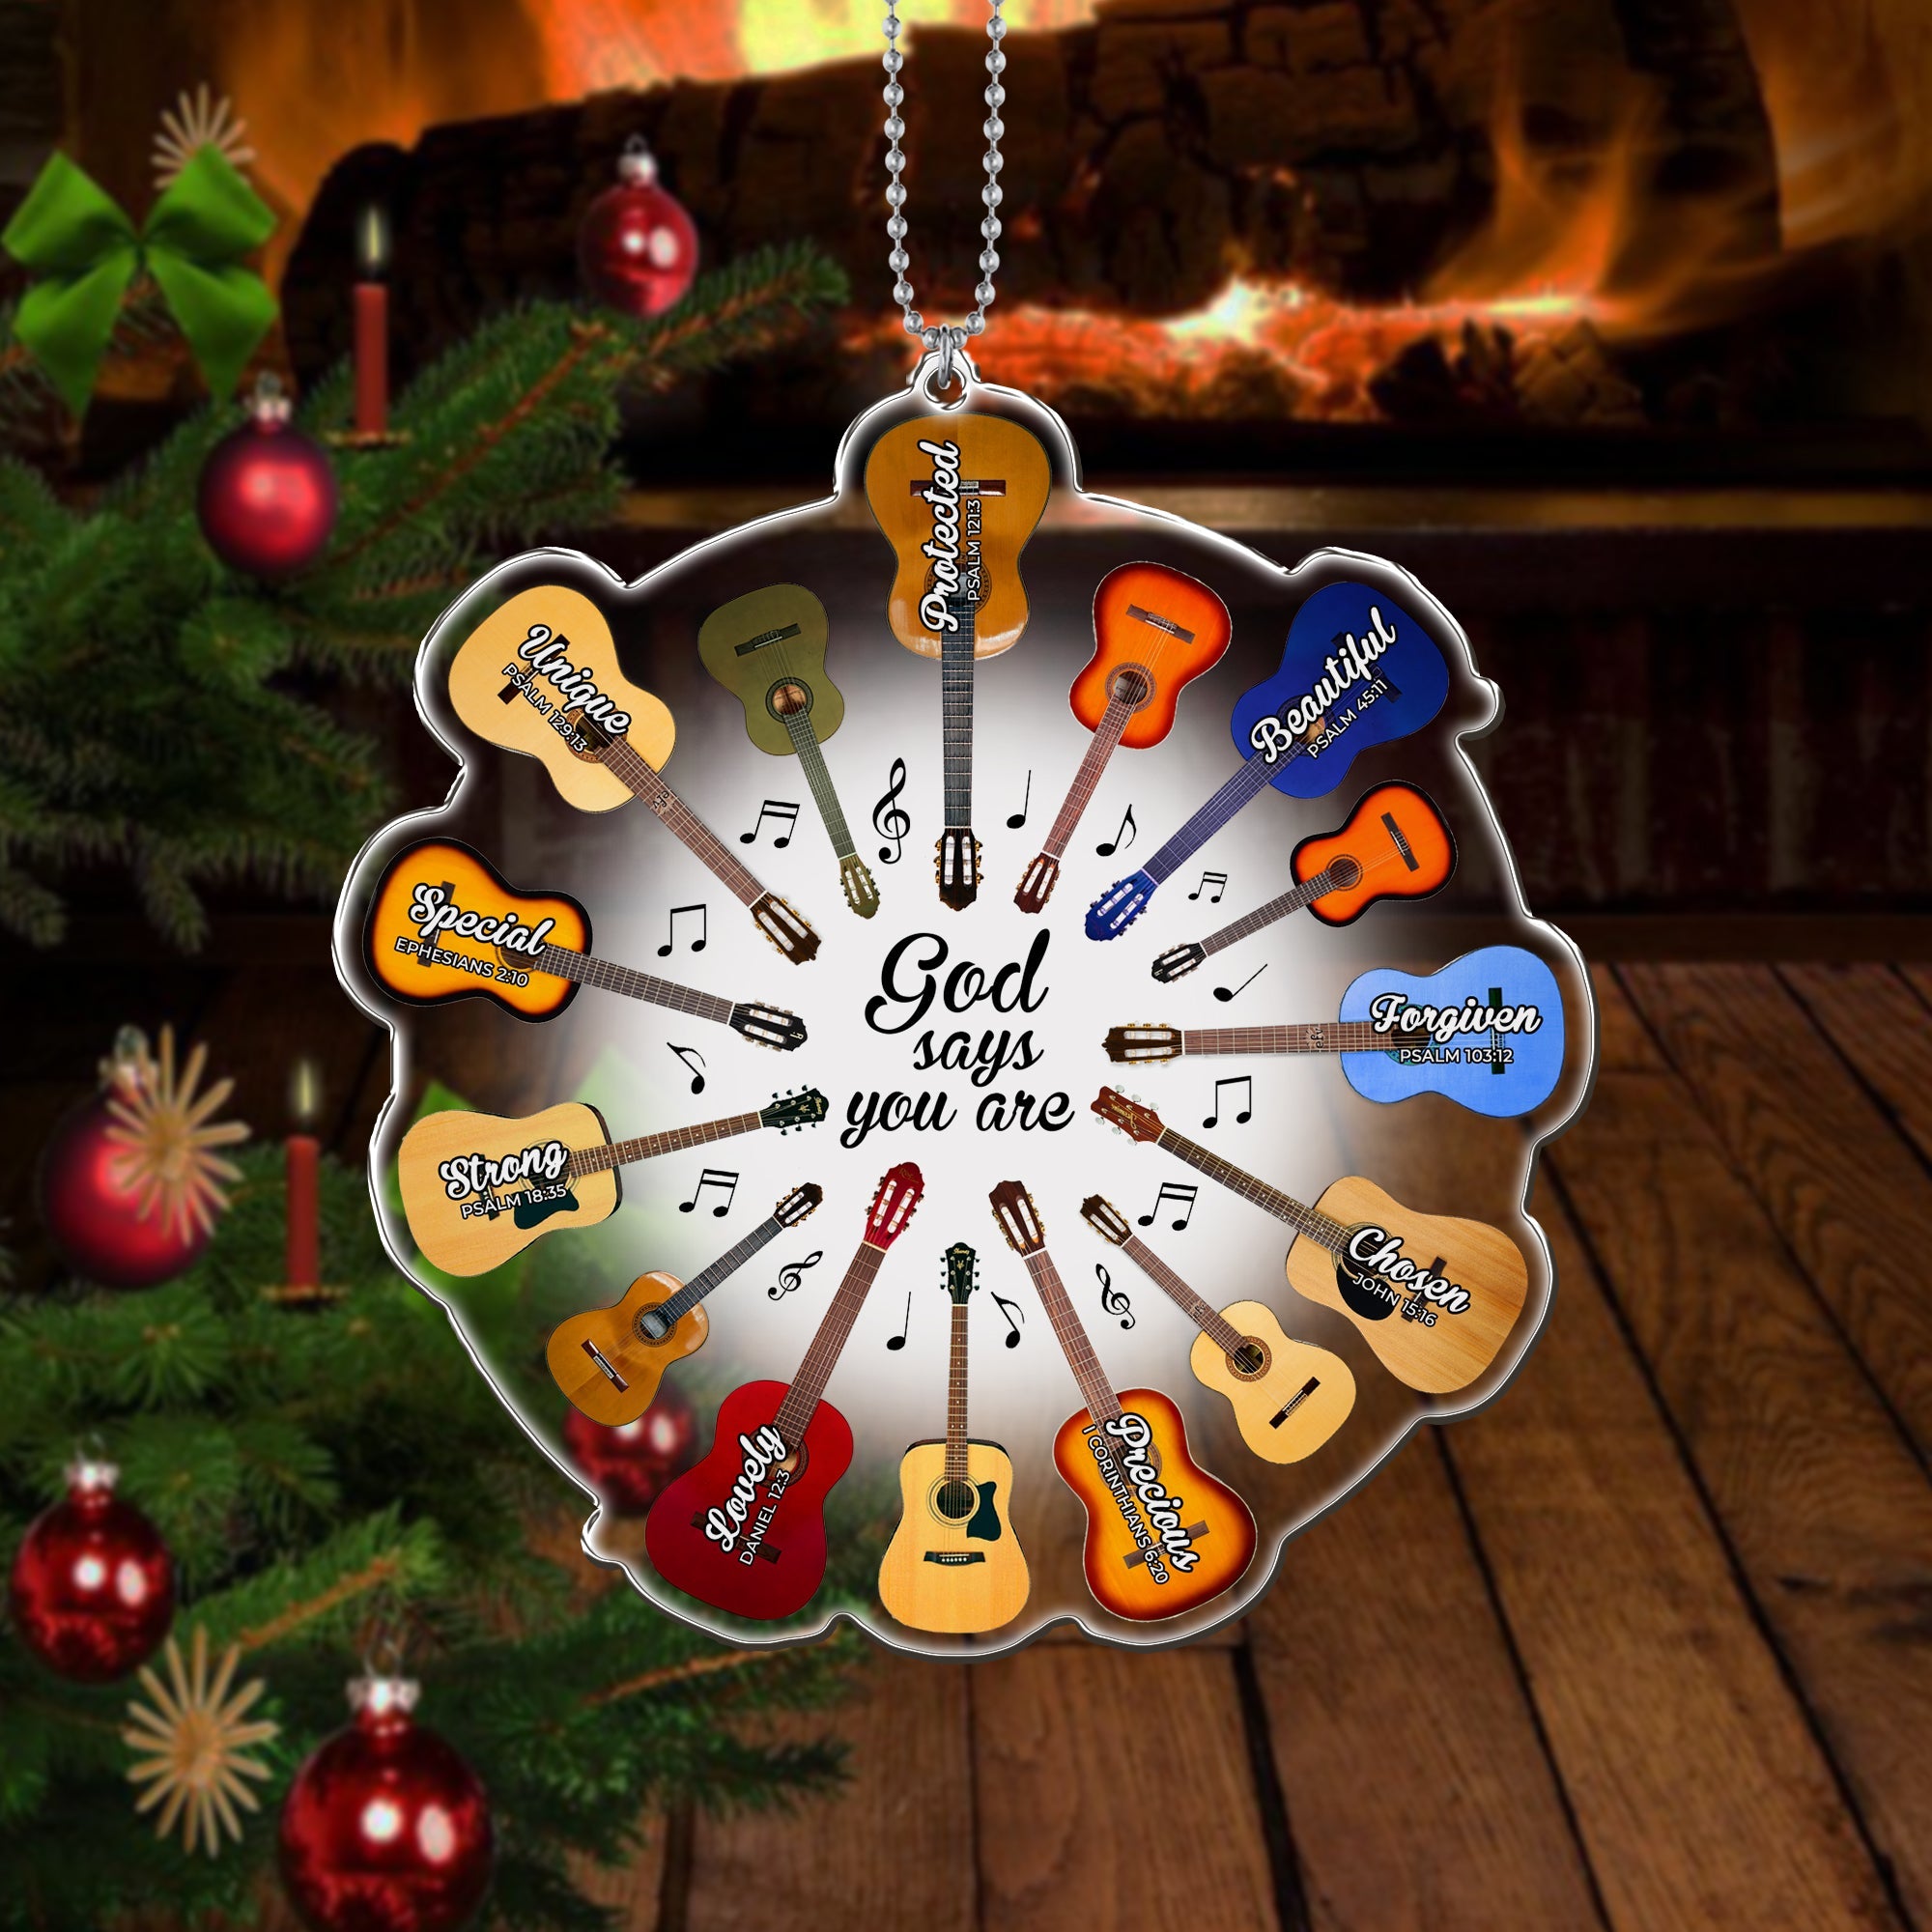 God Say You Are Guitar Acrylic Shaped Christmas Ornament/ Idea Gift for Guitar Lover